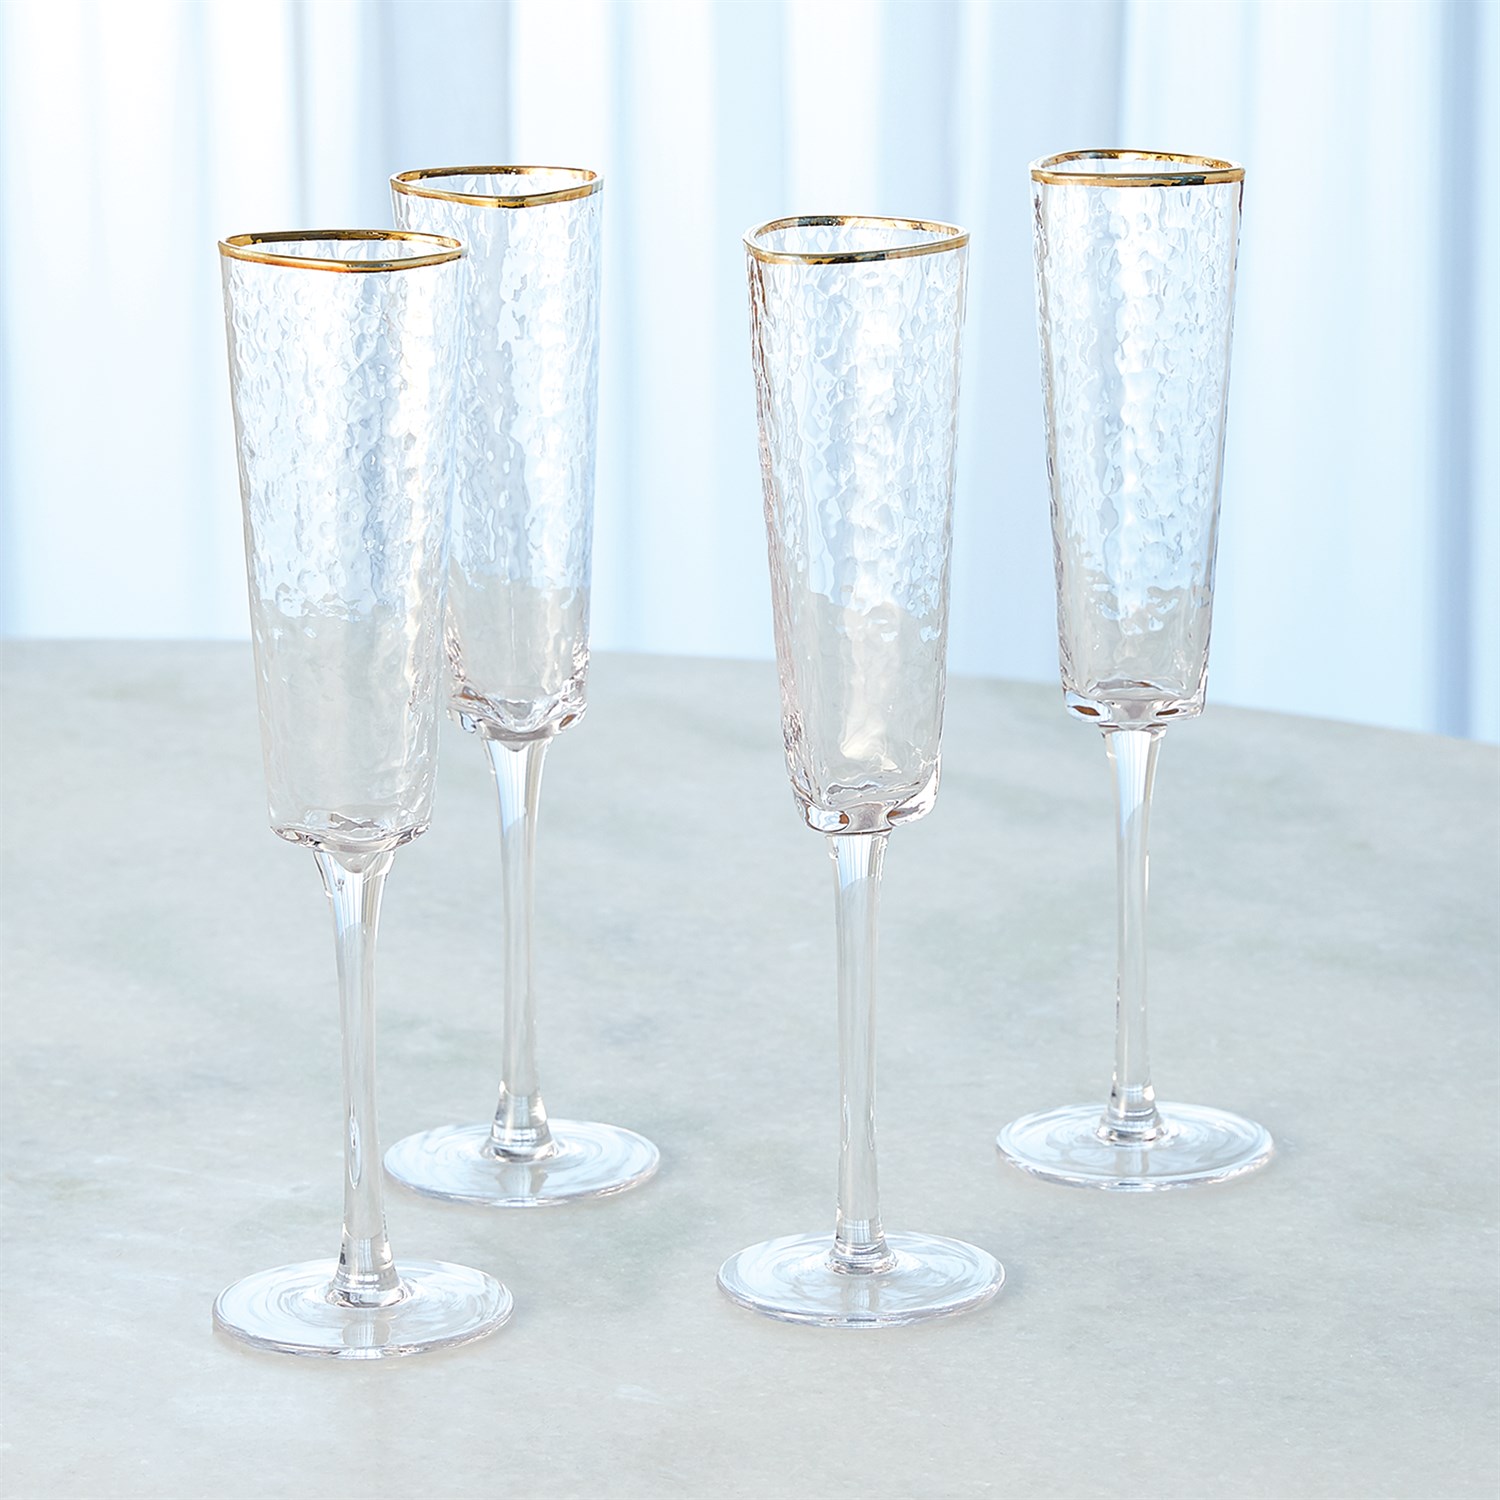 S 4 Hammered Champagne Glasses Clear W Gold Rim